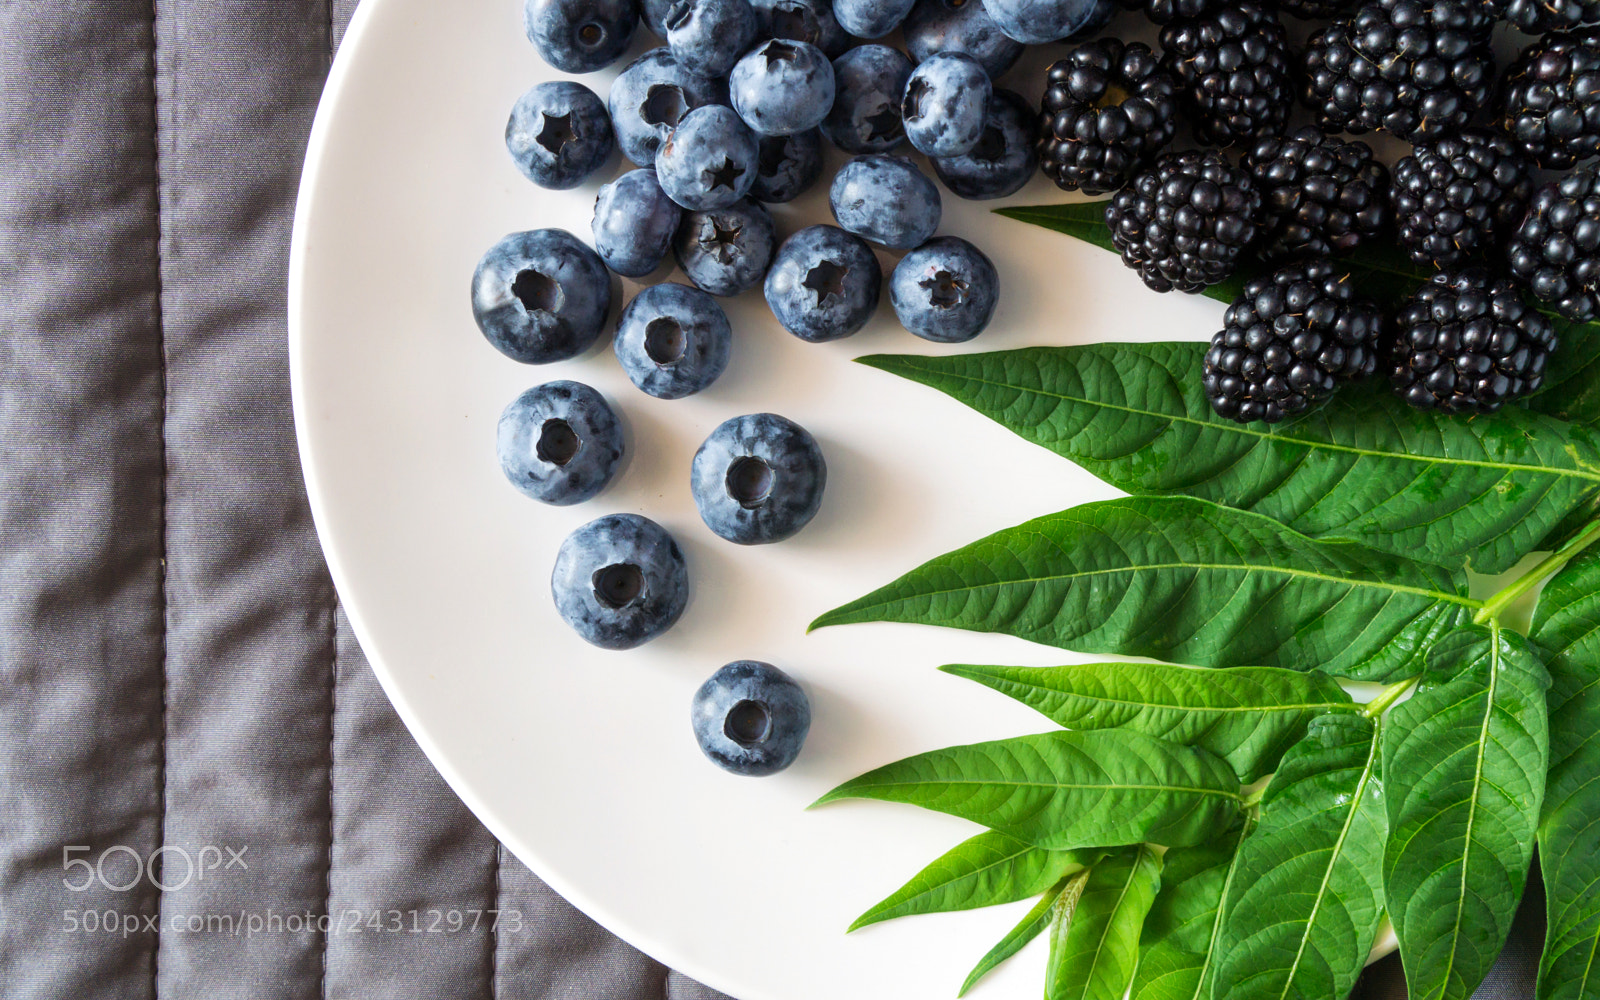 Sony a6000 sample photo. Still life of blueberries photography